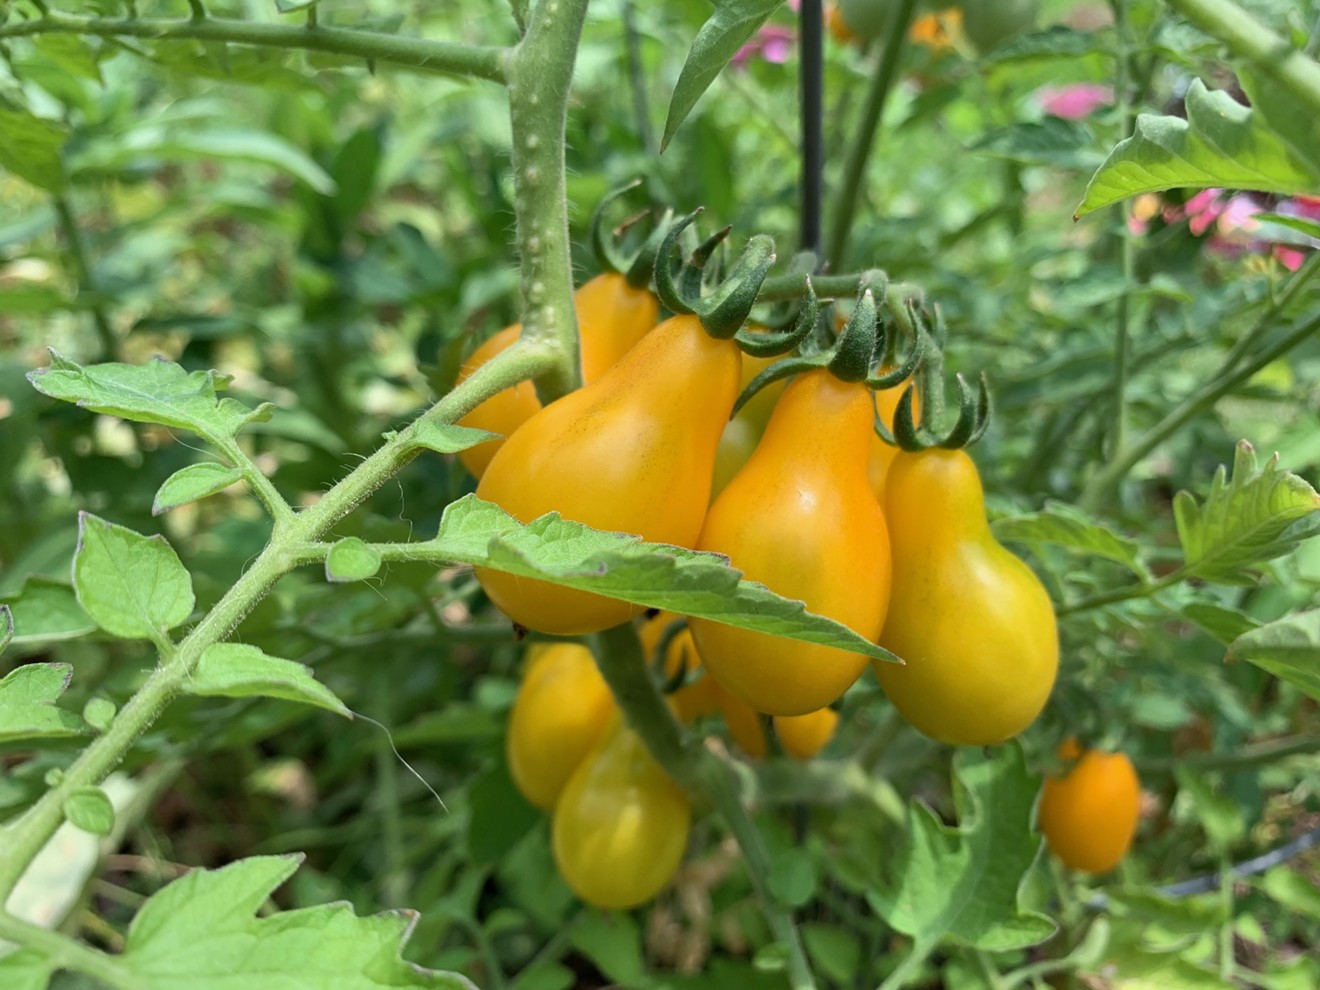 Yellow Pear tomatoes do well in Houston's heat.